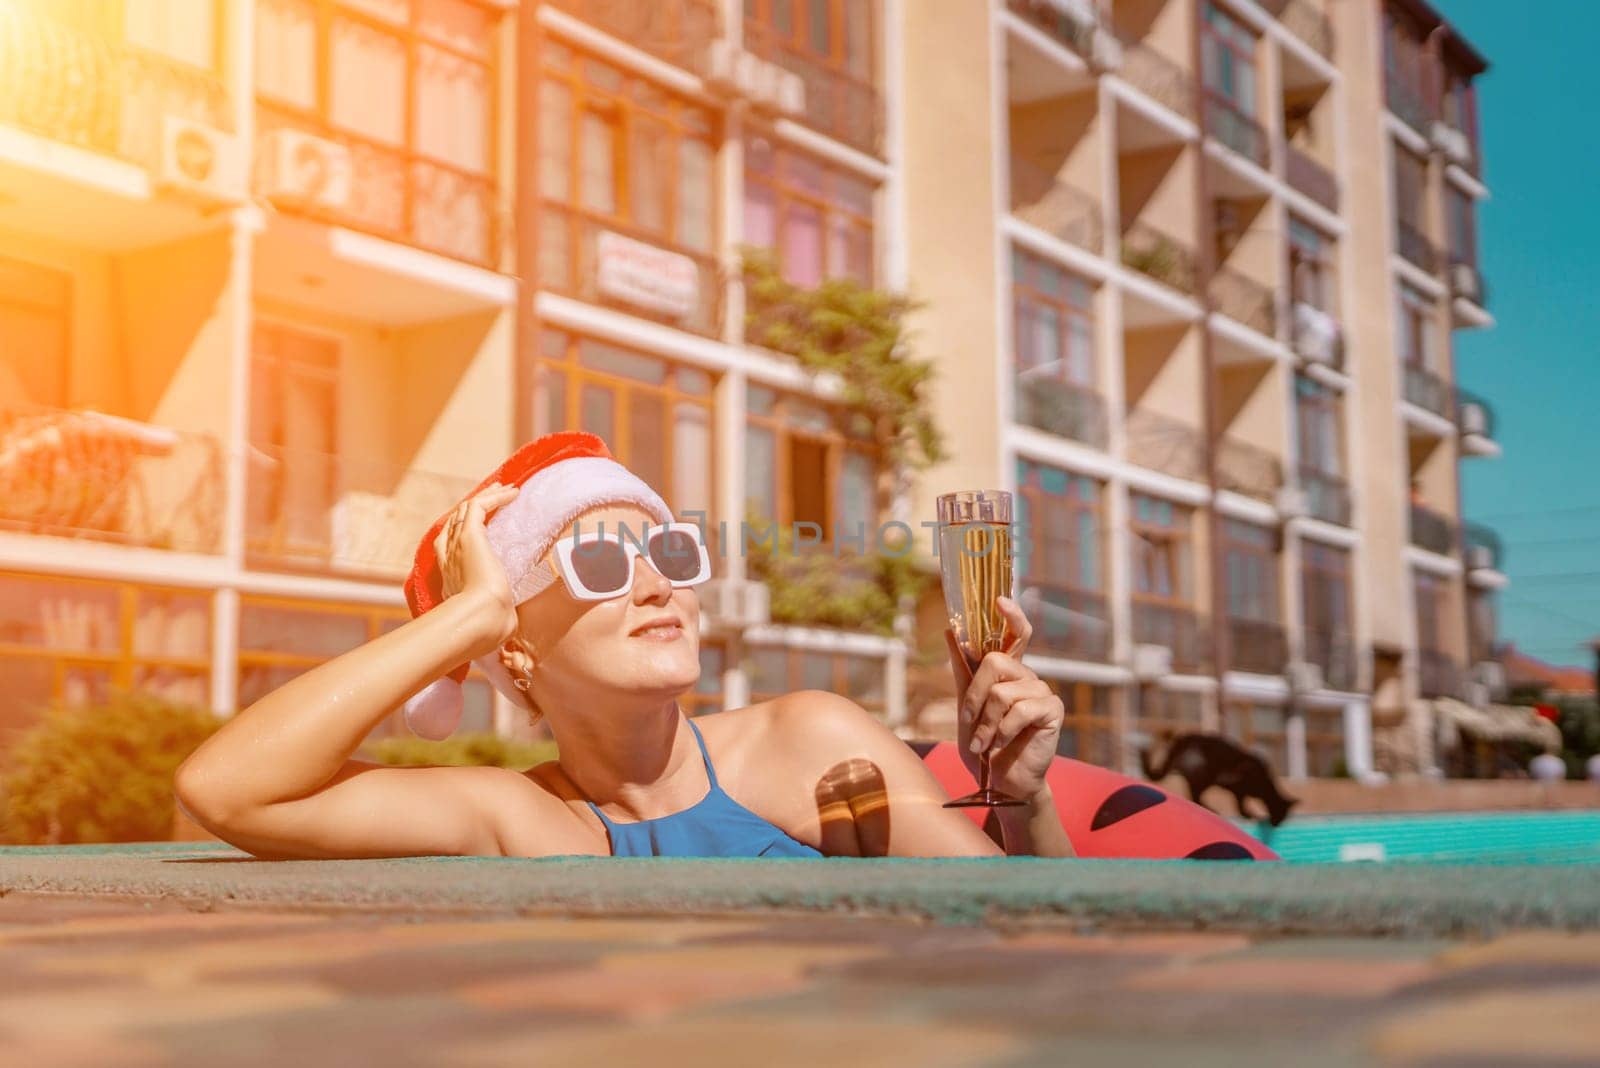 Woman pool Santa hat. A happy woman in a blue bikini, a red and white Santa hat and sunglasses poses near the pool with a glass of champagne standing nearby. Christmas holidays concept. by Matiunina